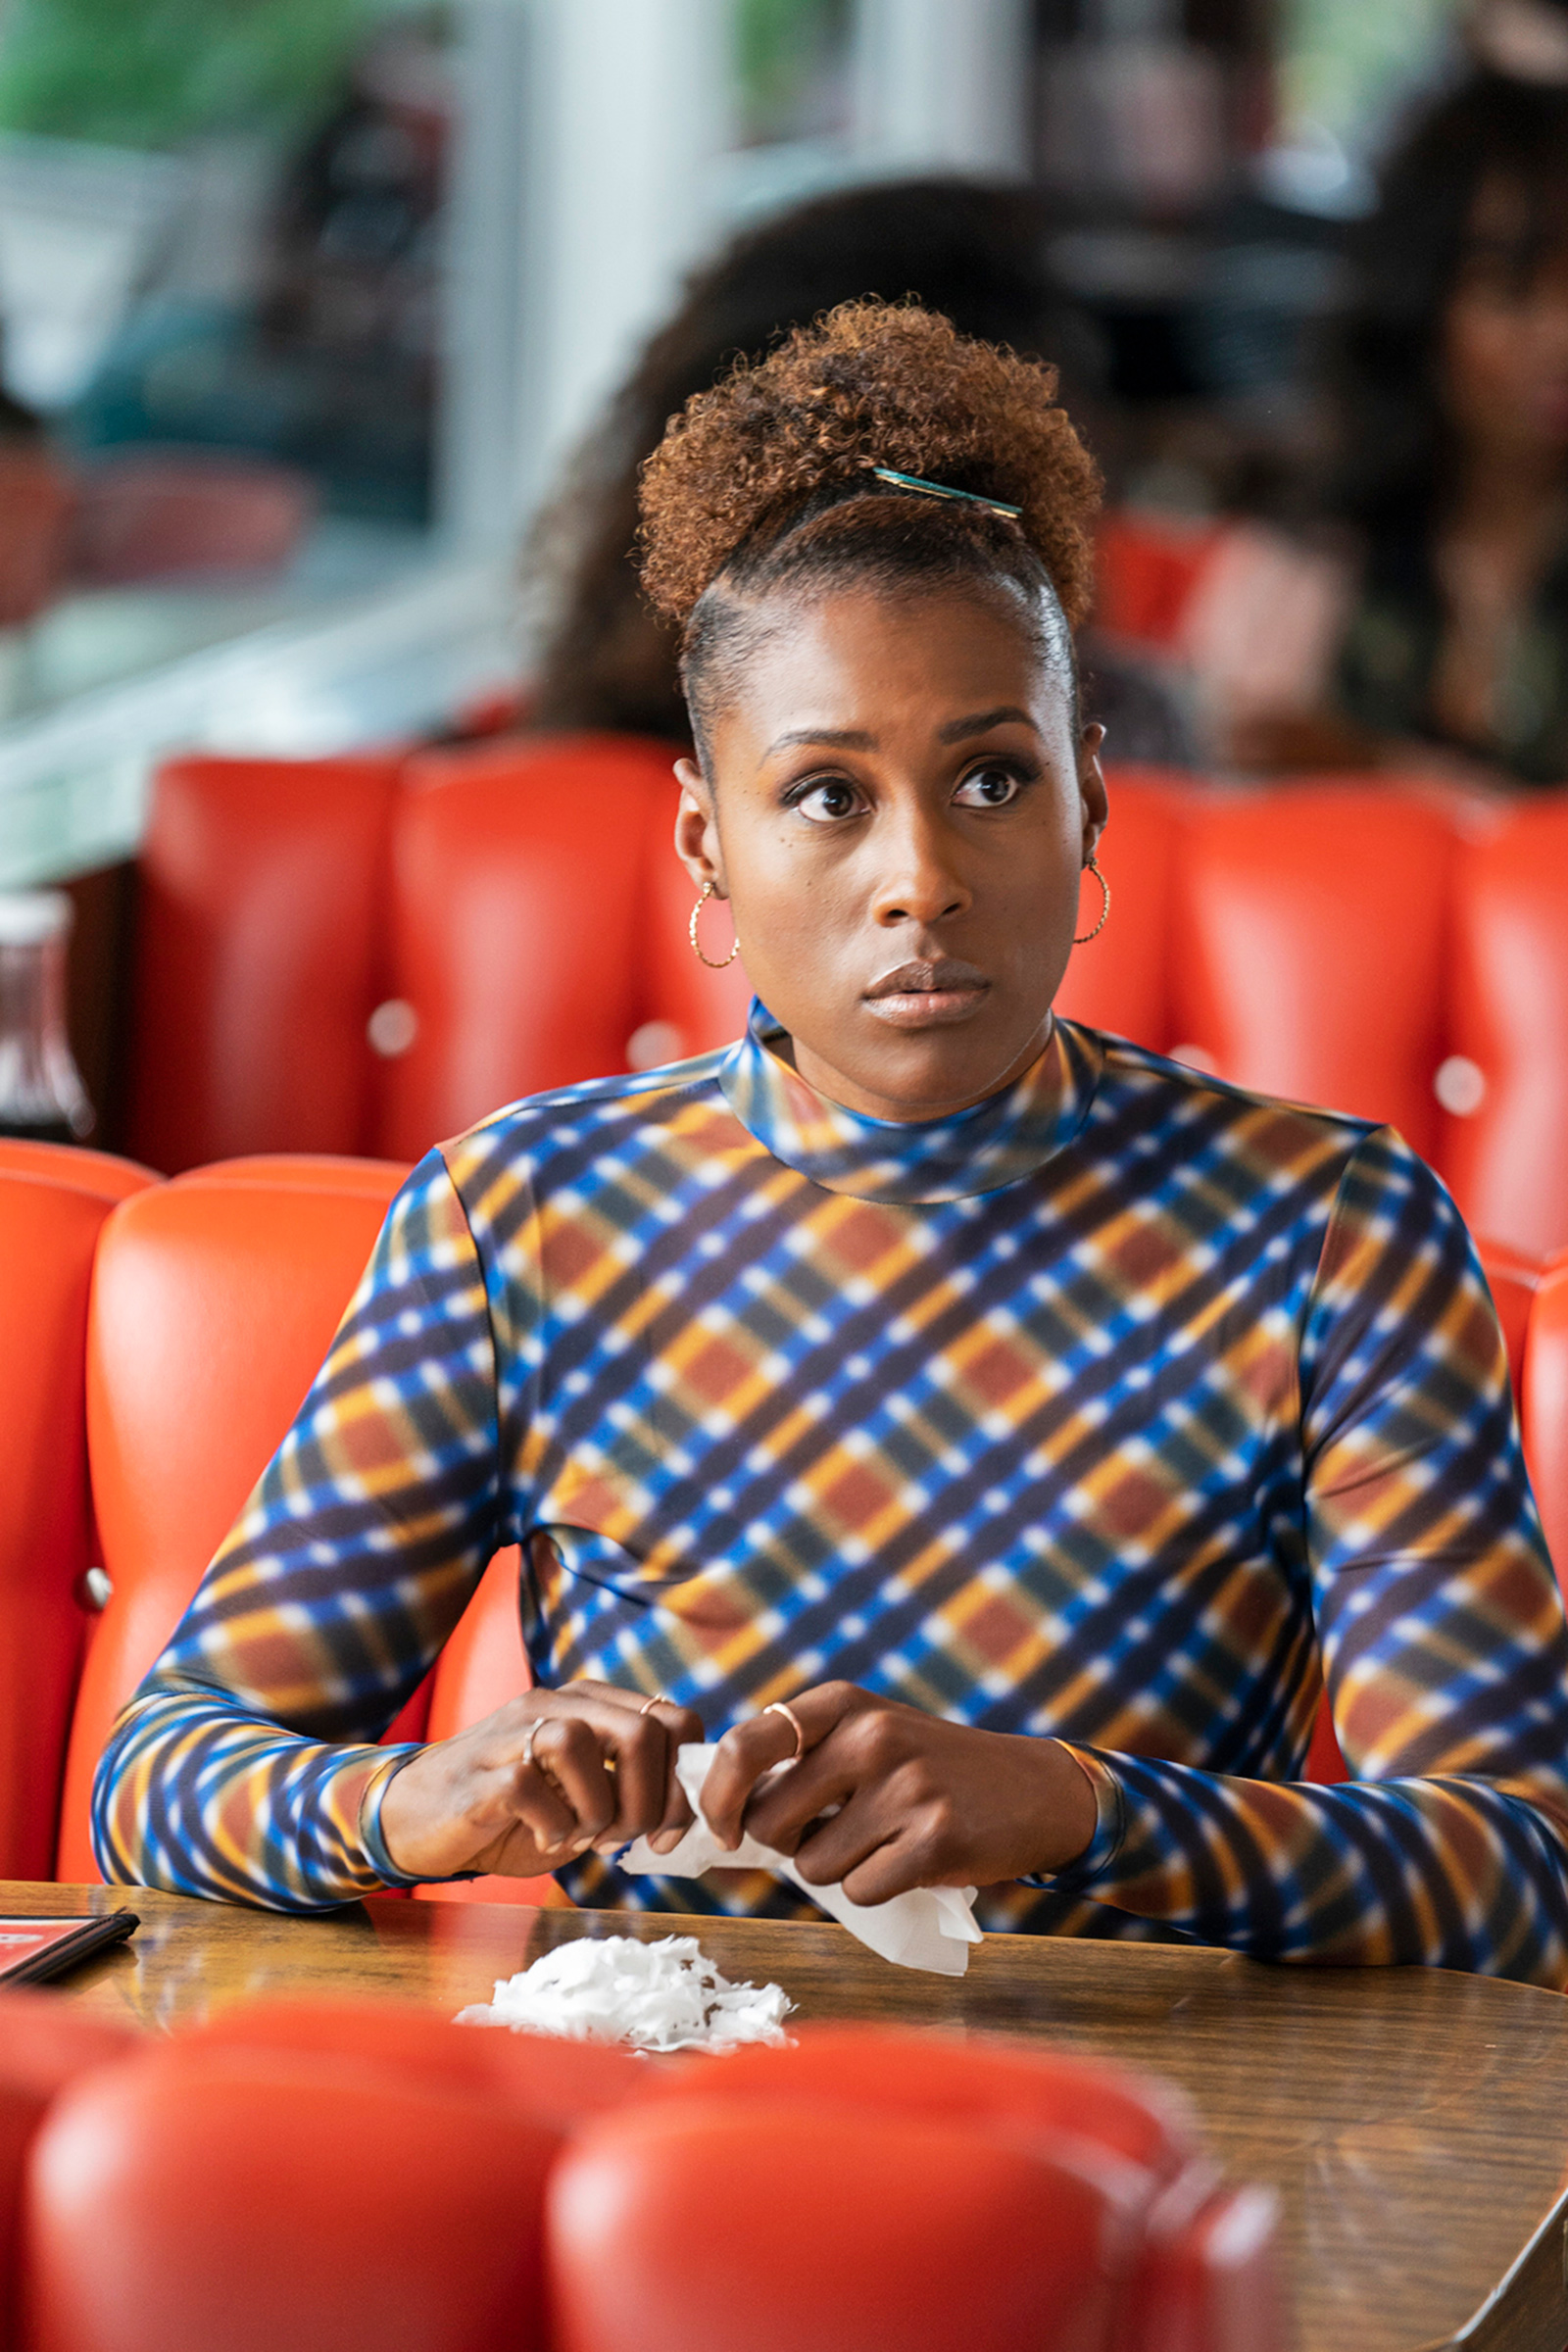 Issa Rae in Insecure (Merie W. Wallace—HBO)